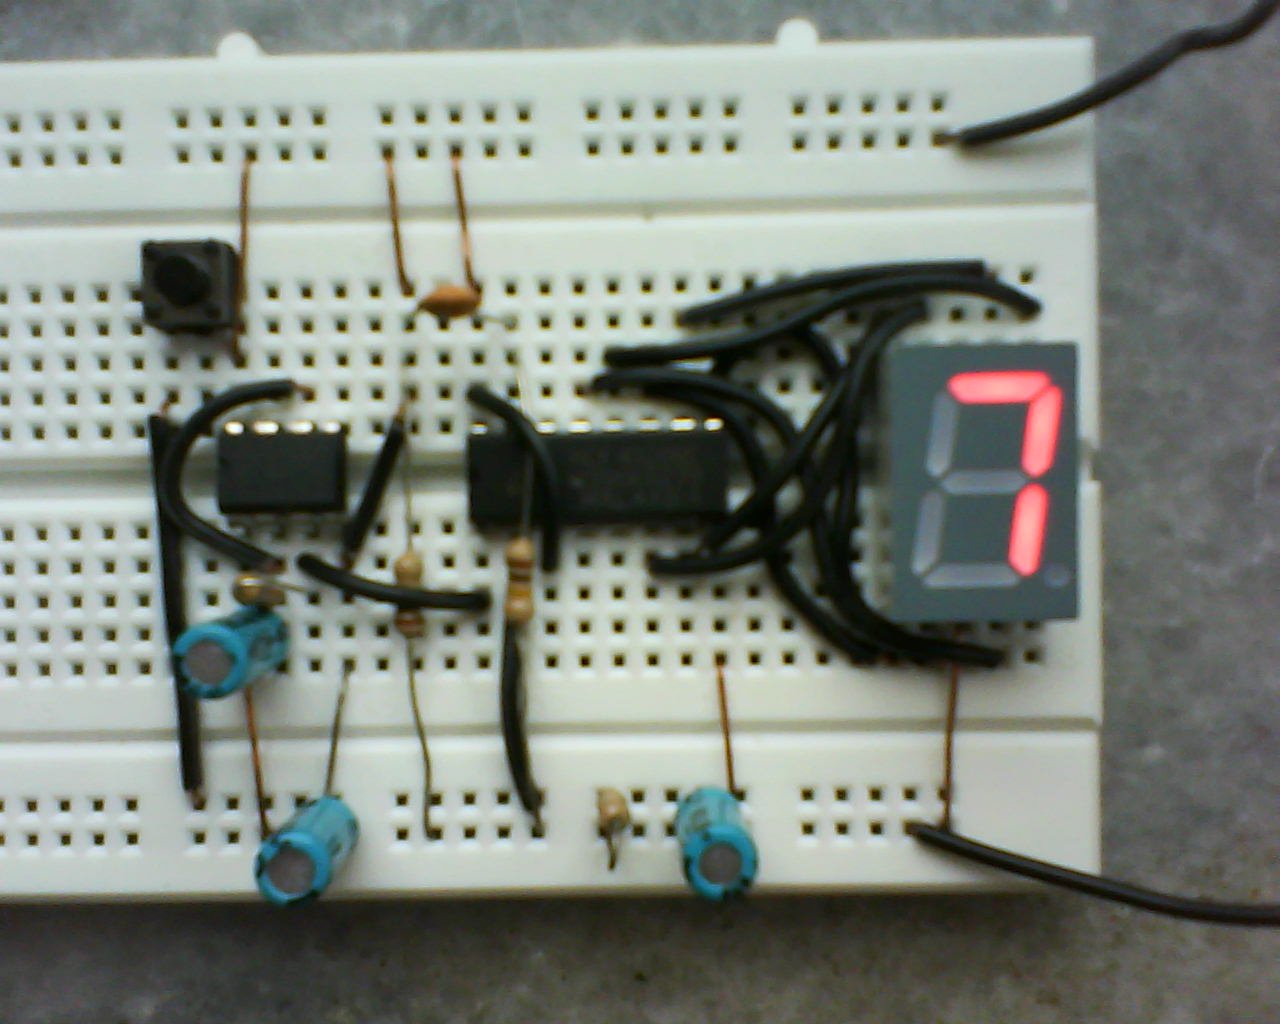 Digital Pulse Counter ~ Open Source Hardware and Computing1280 x 1024